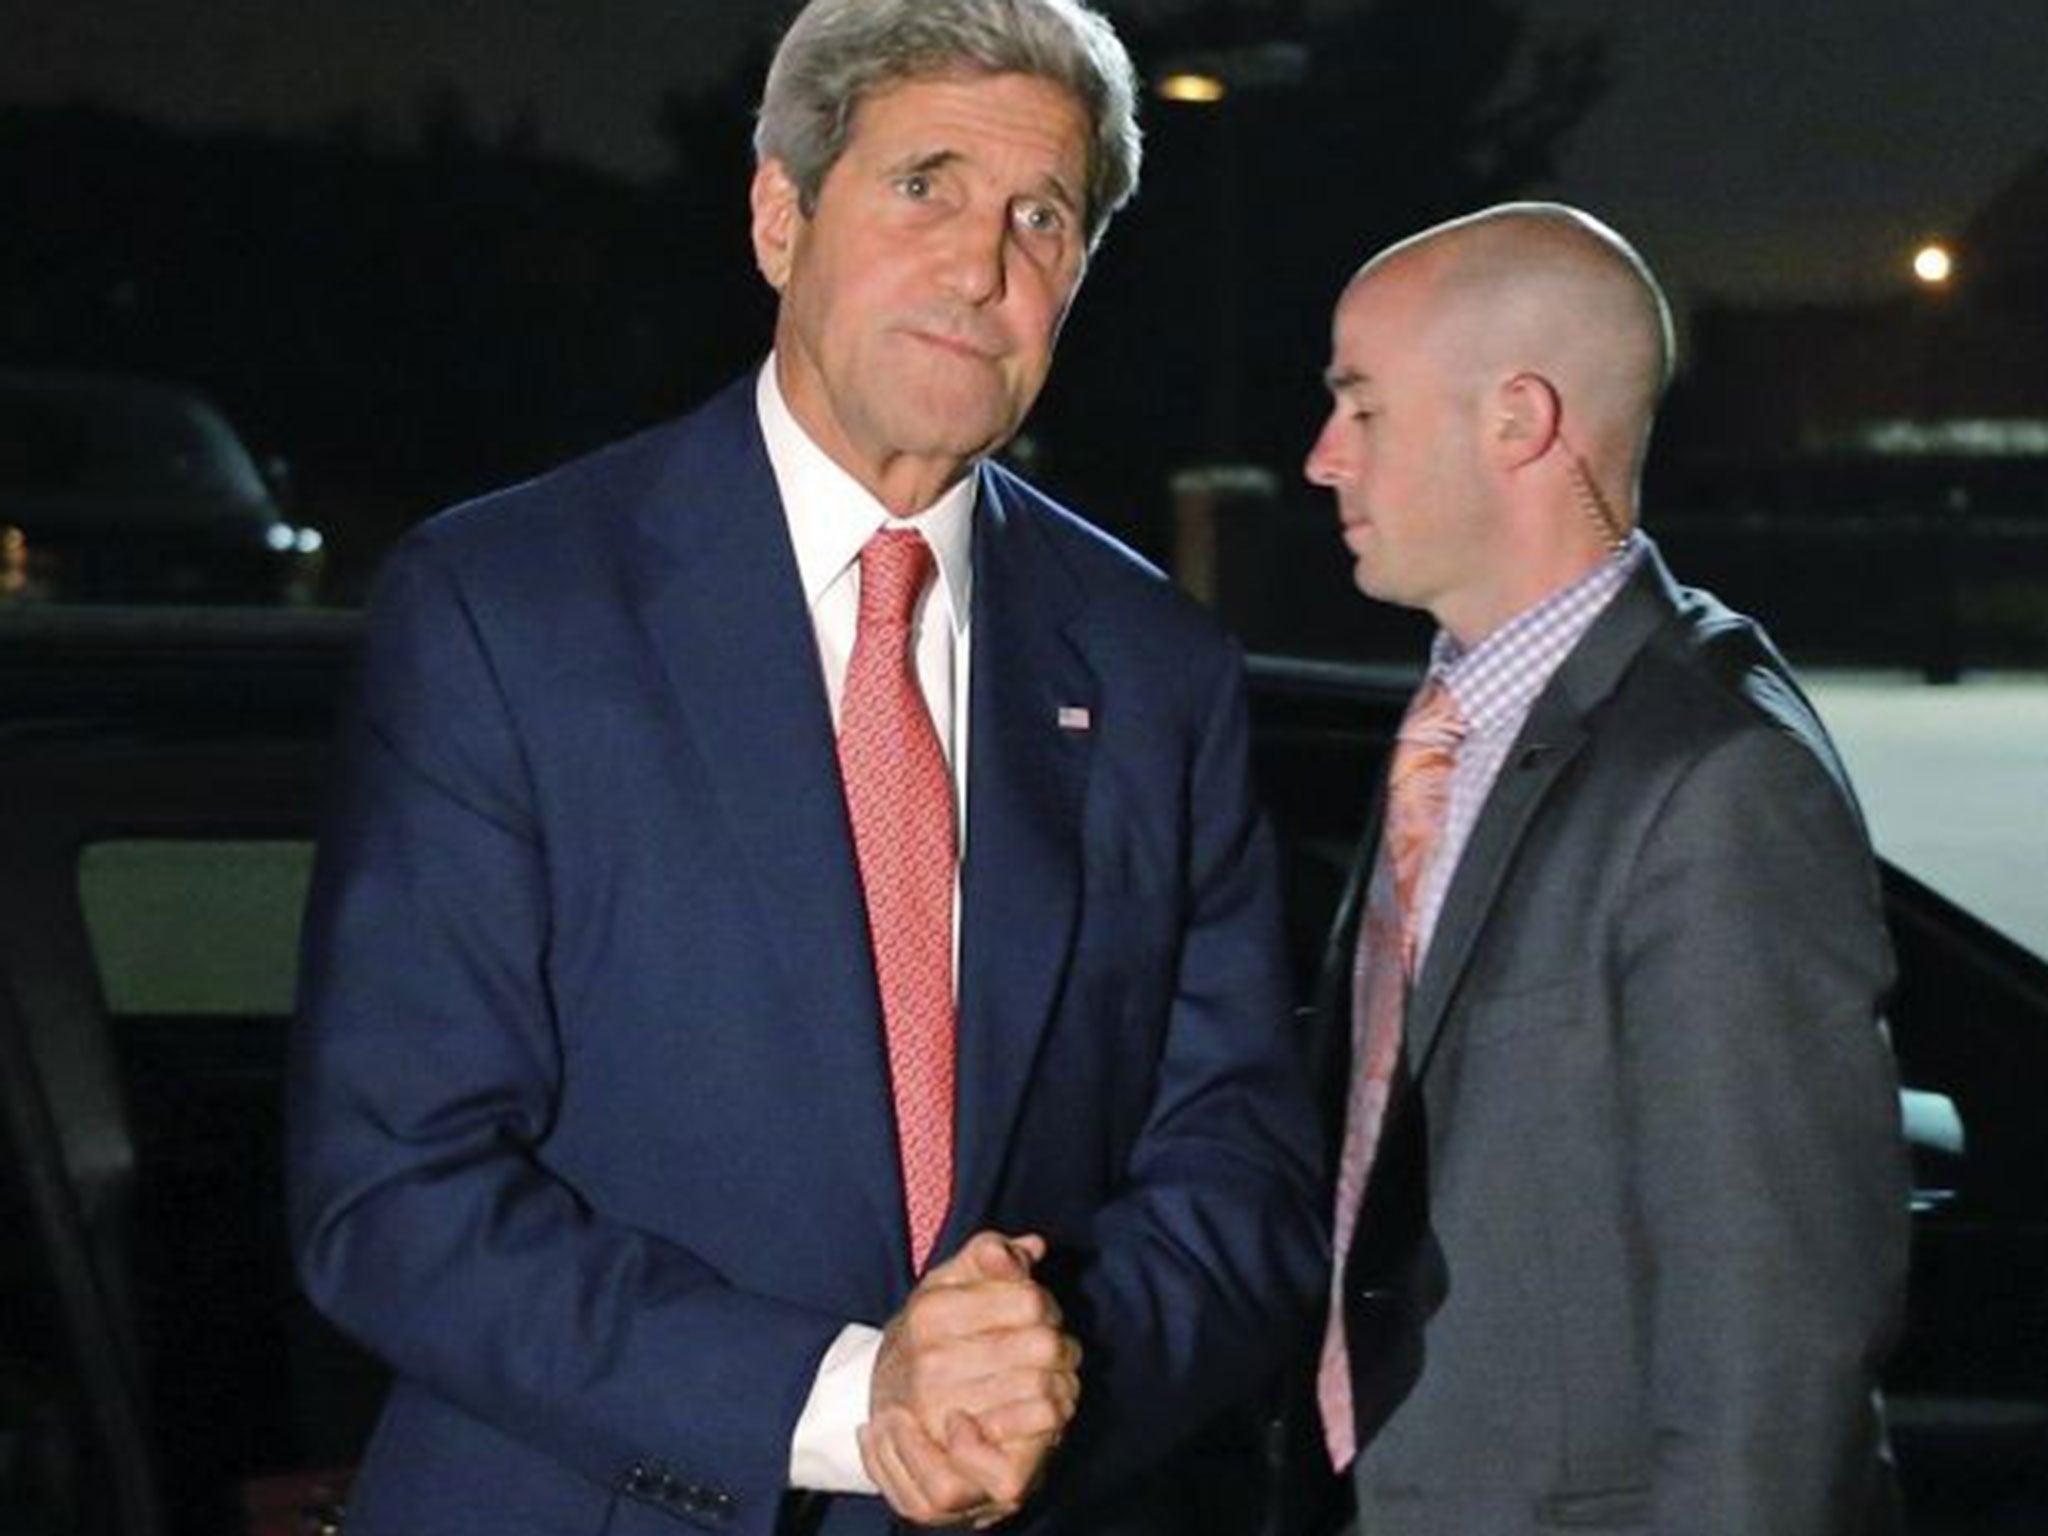 Kerry steps out of his vehicle to board his plane at Andrews Air Force Base as he begins his trip to the Middle East